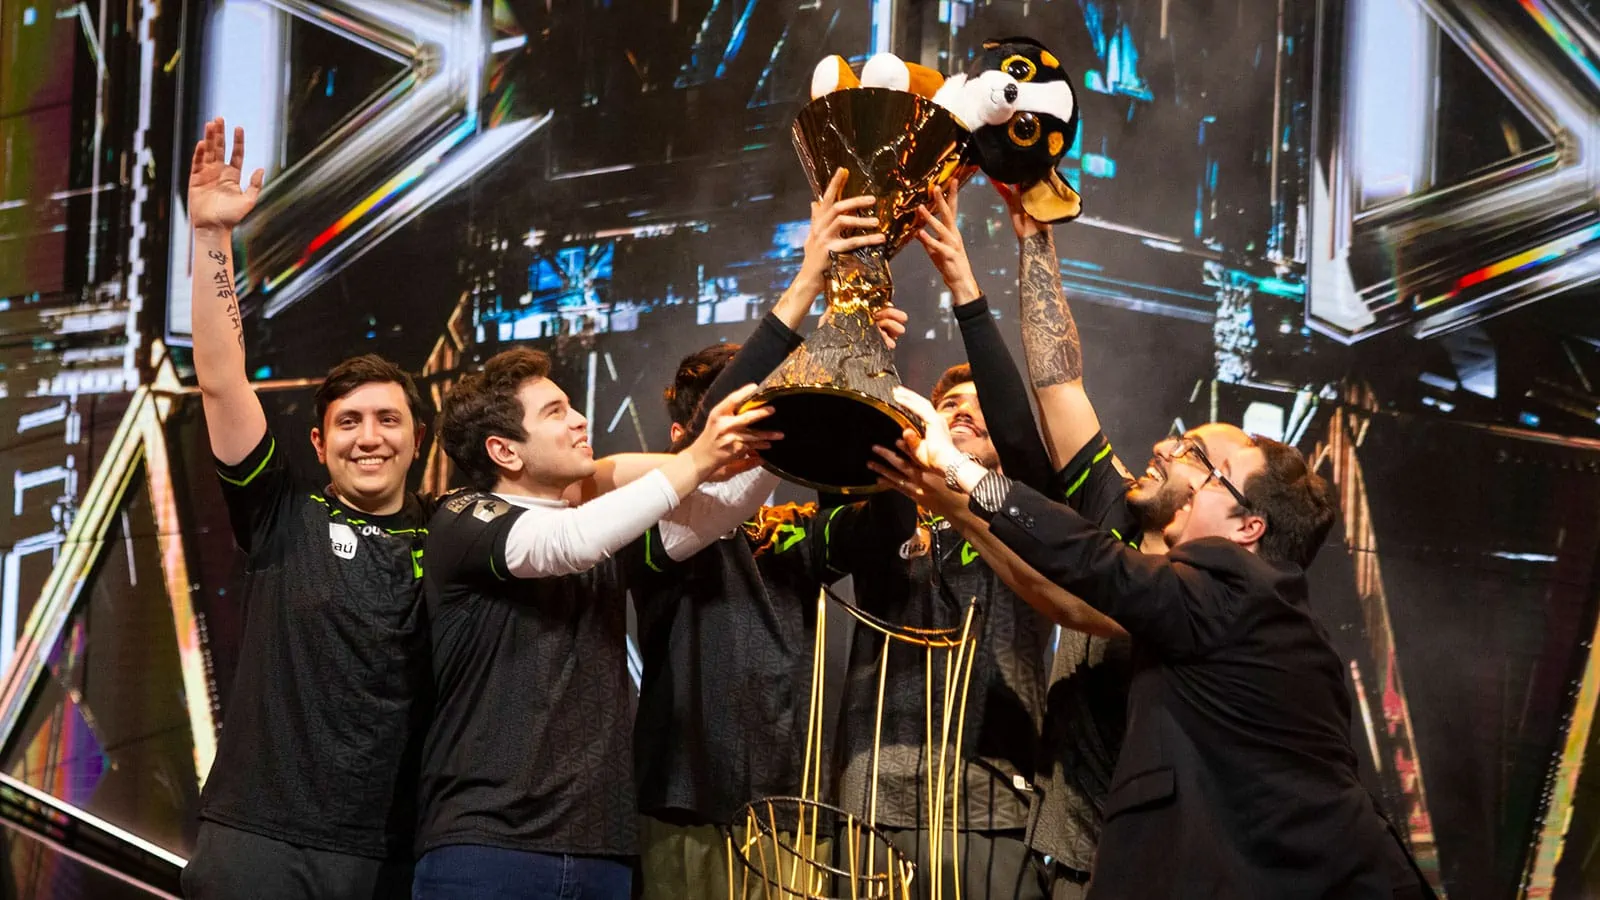 Brazil is the only country to win a world championship in Valorant, CS:GO, and R6 - ONE Esports (Picture 1)